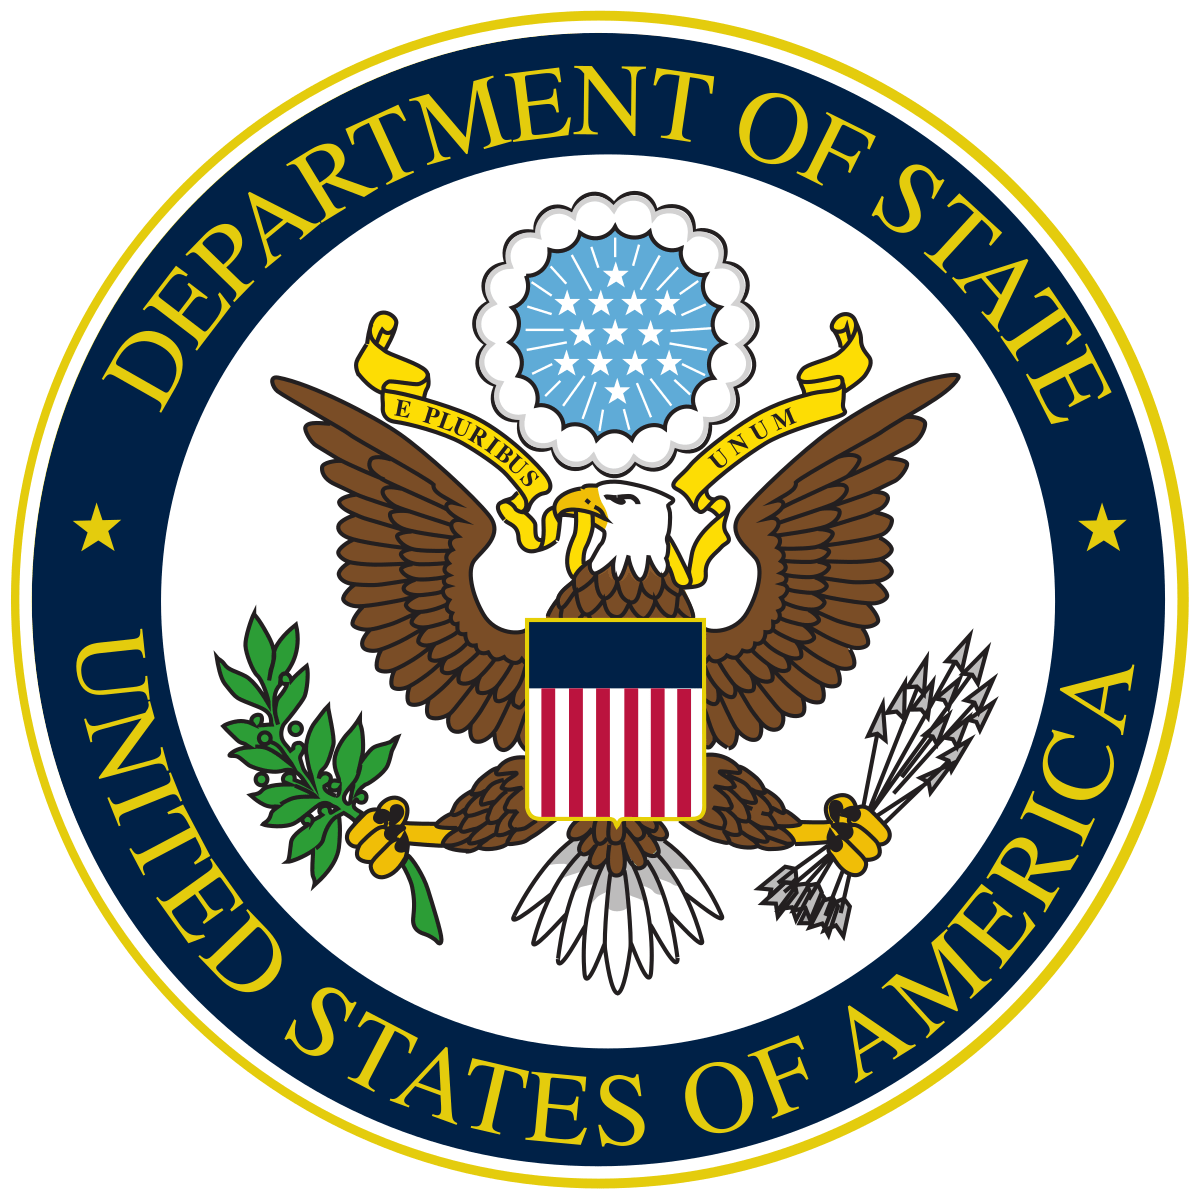 United States Department of State Seal